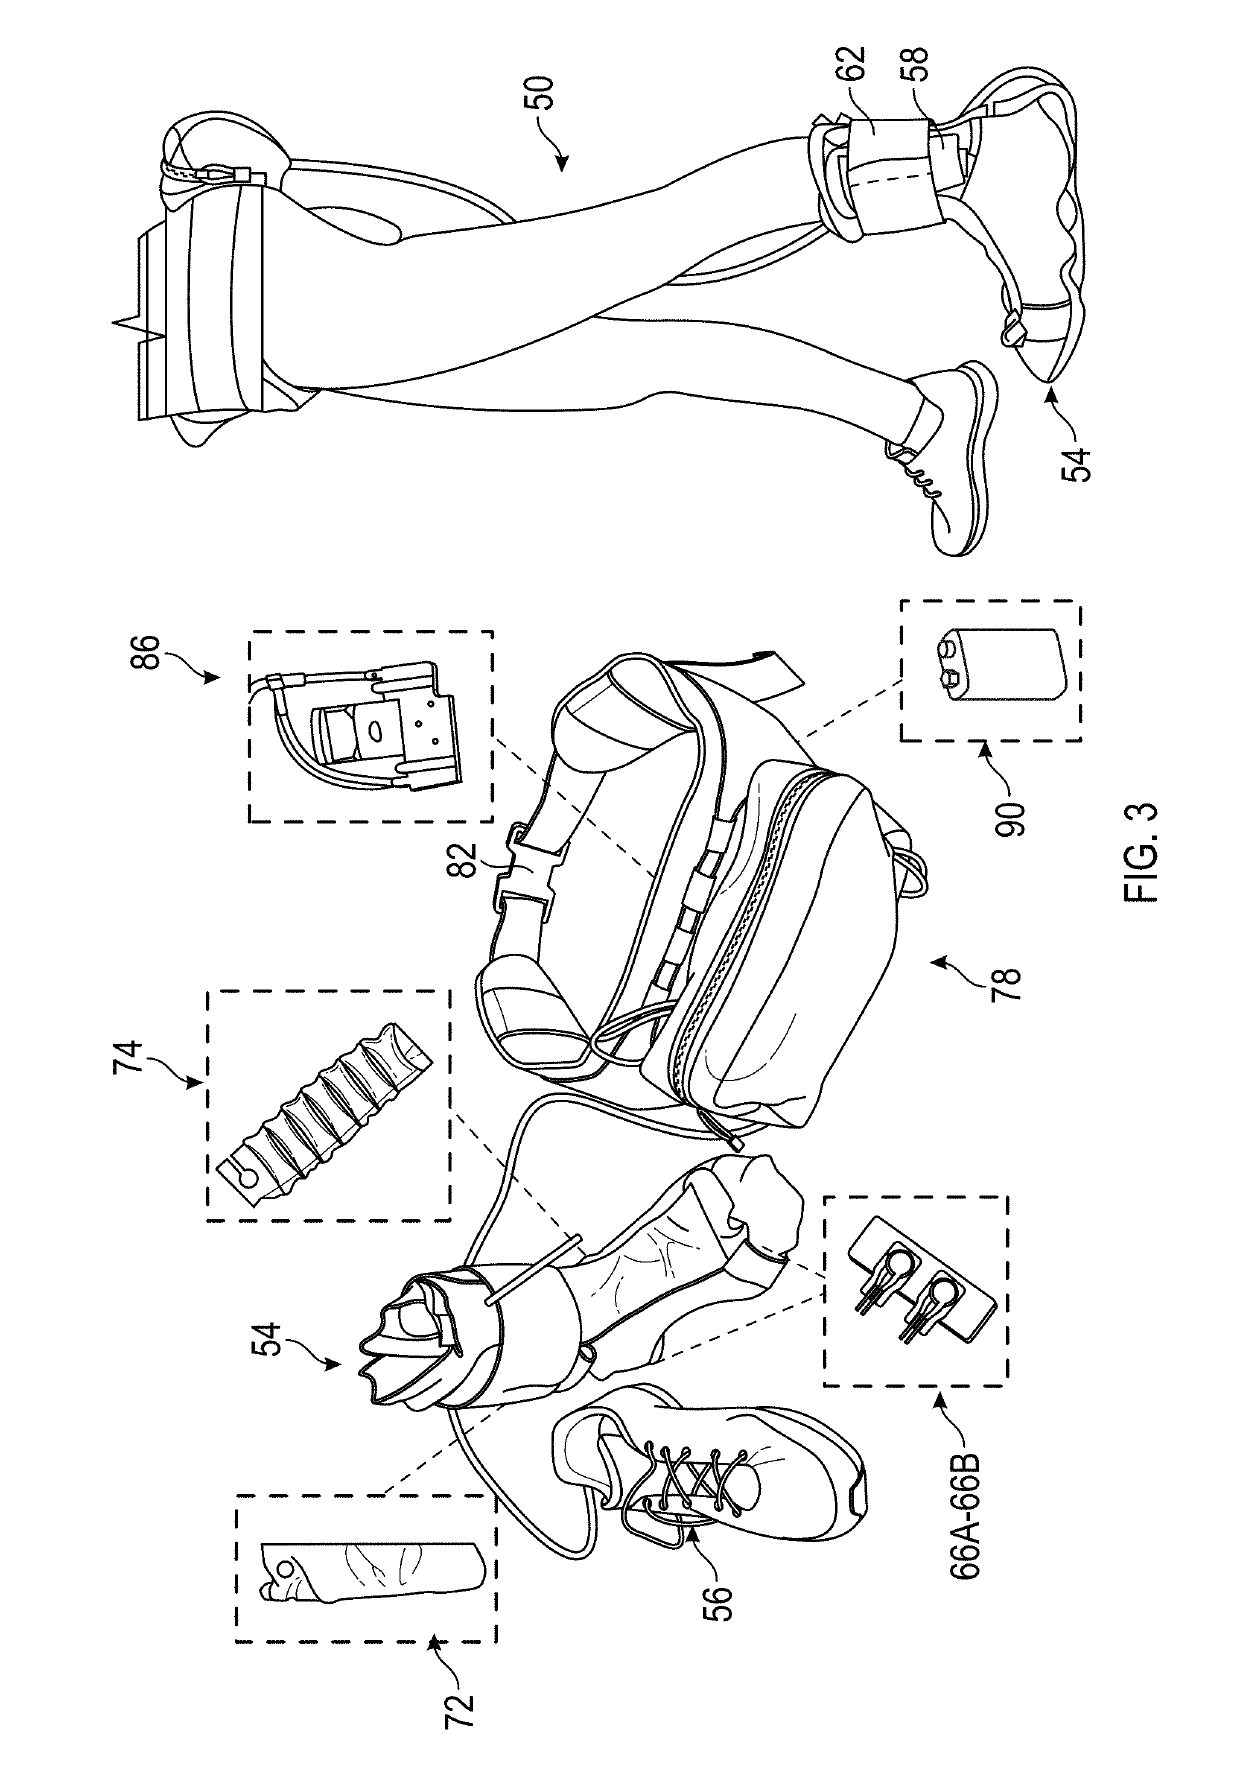 Soft dynamic ankle-foot orthosis exosuit for gait assistance with foot drop